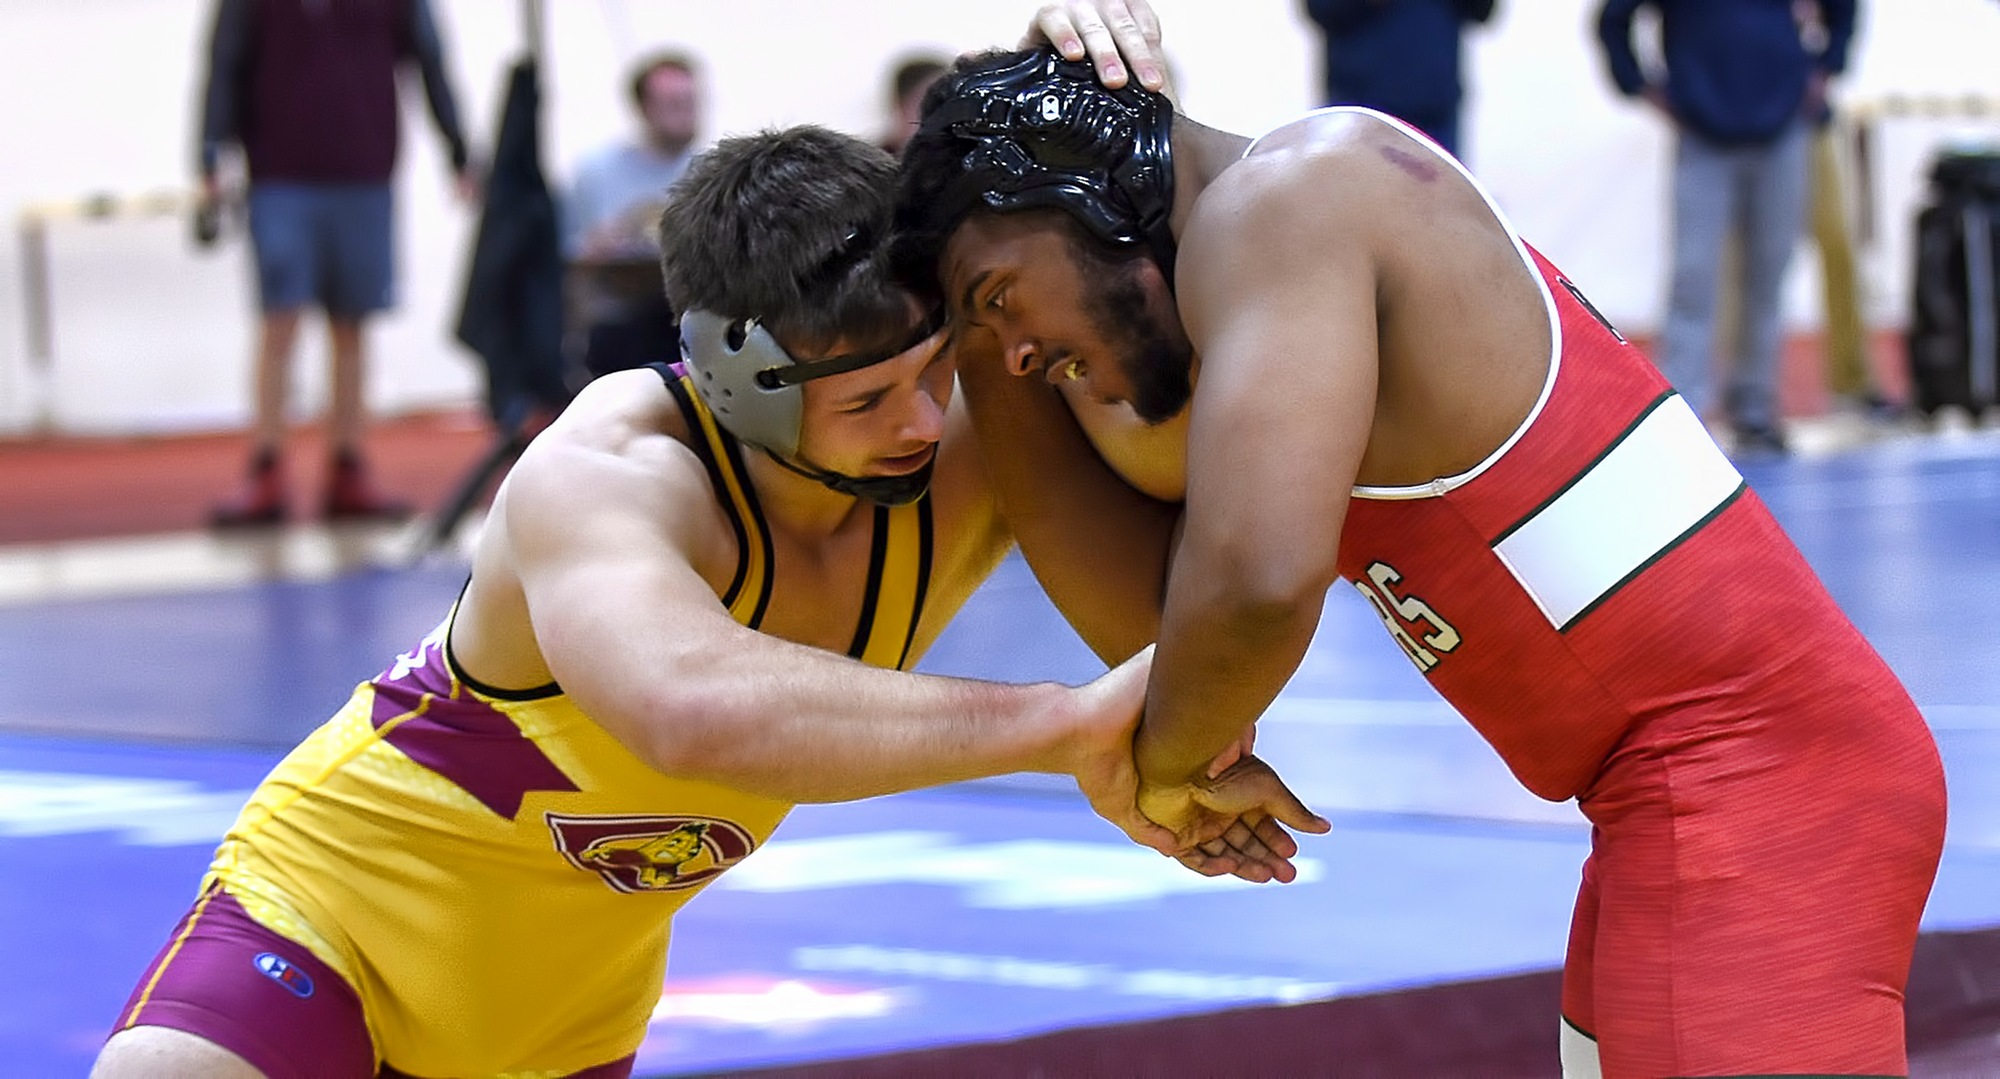 Jacob Arends locks up with his opponent during the Finn Grinaker Cobber Open. Arends went on to pin his opponent during the consolation third-round match.